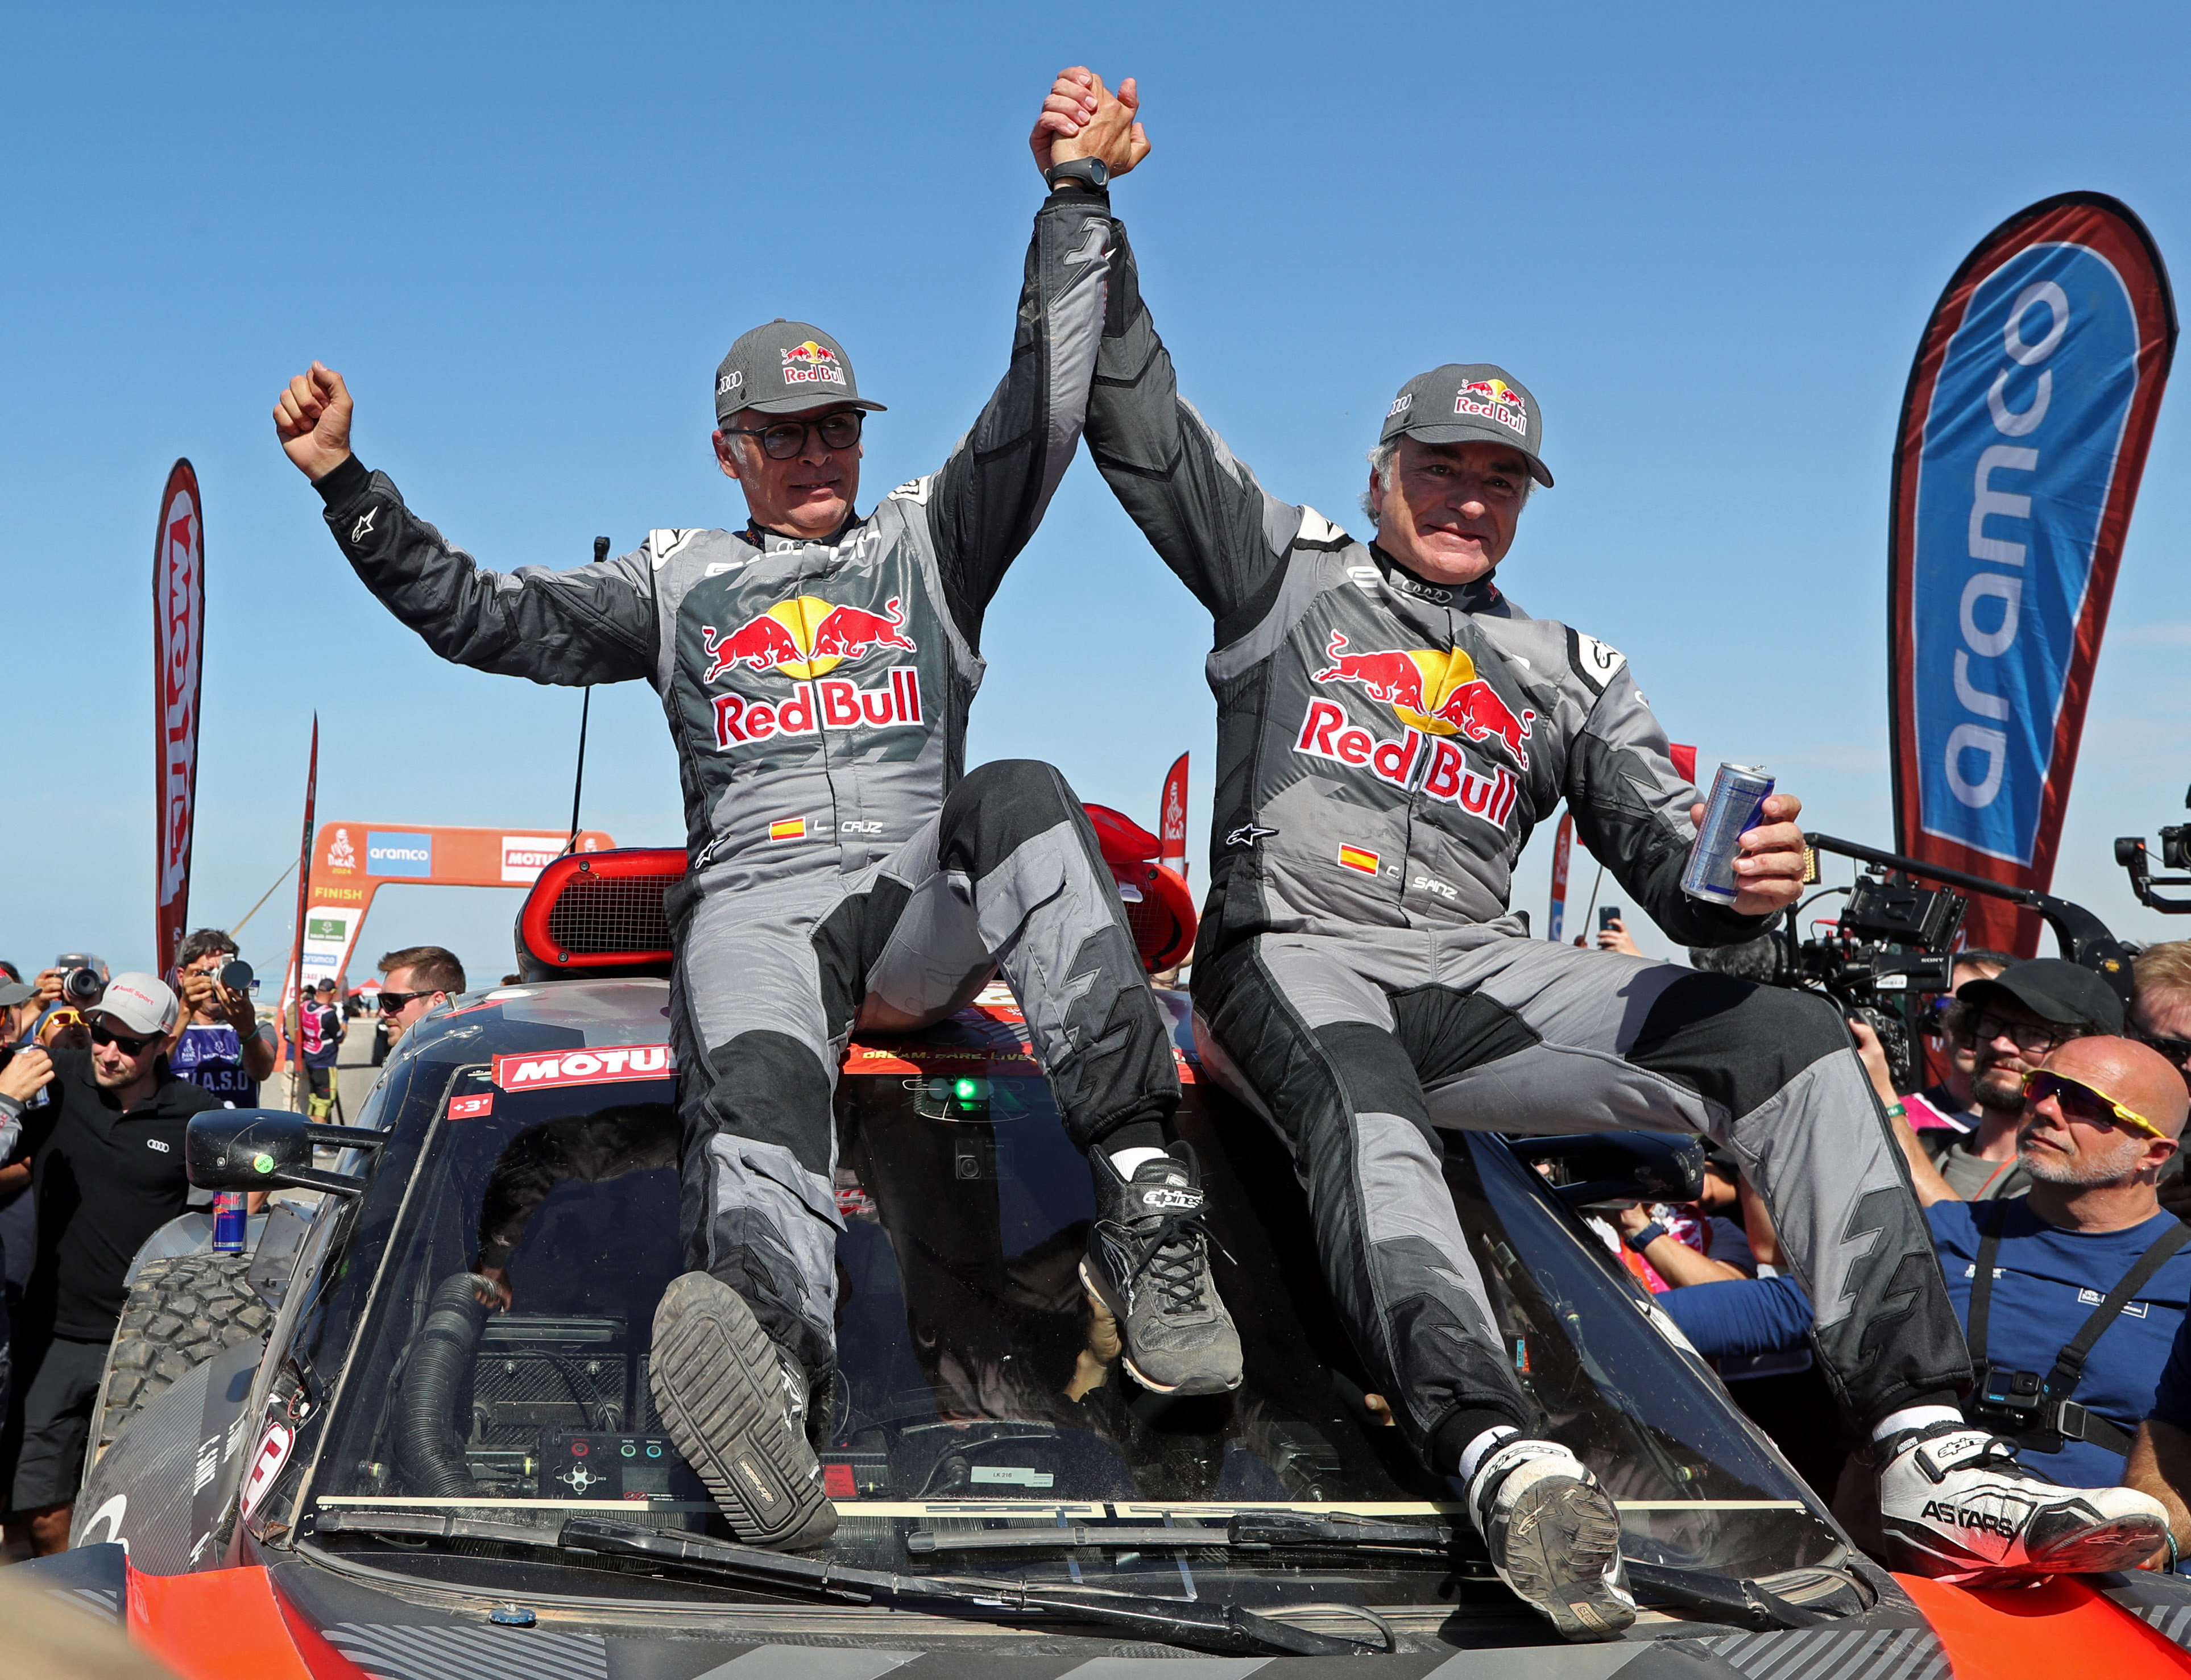 Carlos Sainz (right) and co-driver Lucas Cruz celebrate after winning the car category at the Dakar Rally. Photo: Reuters